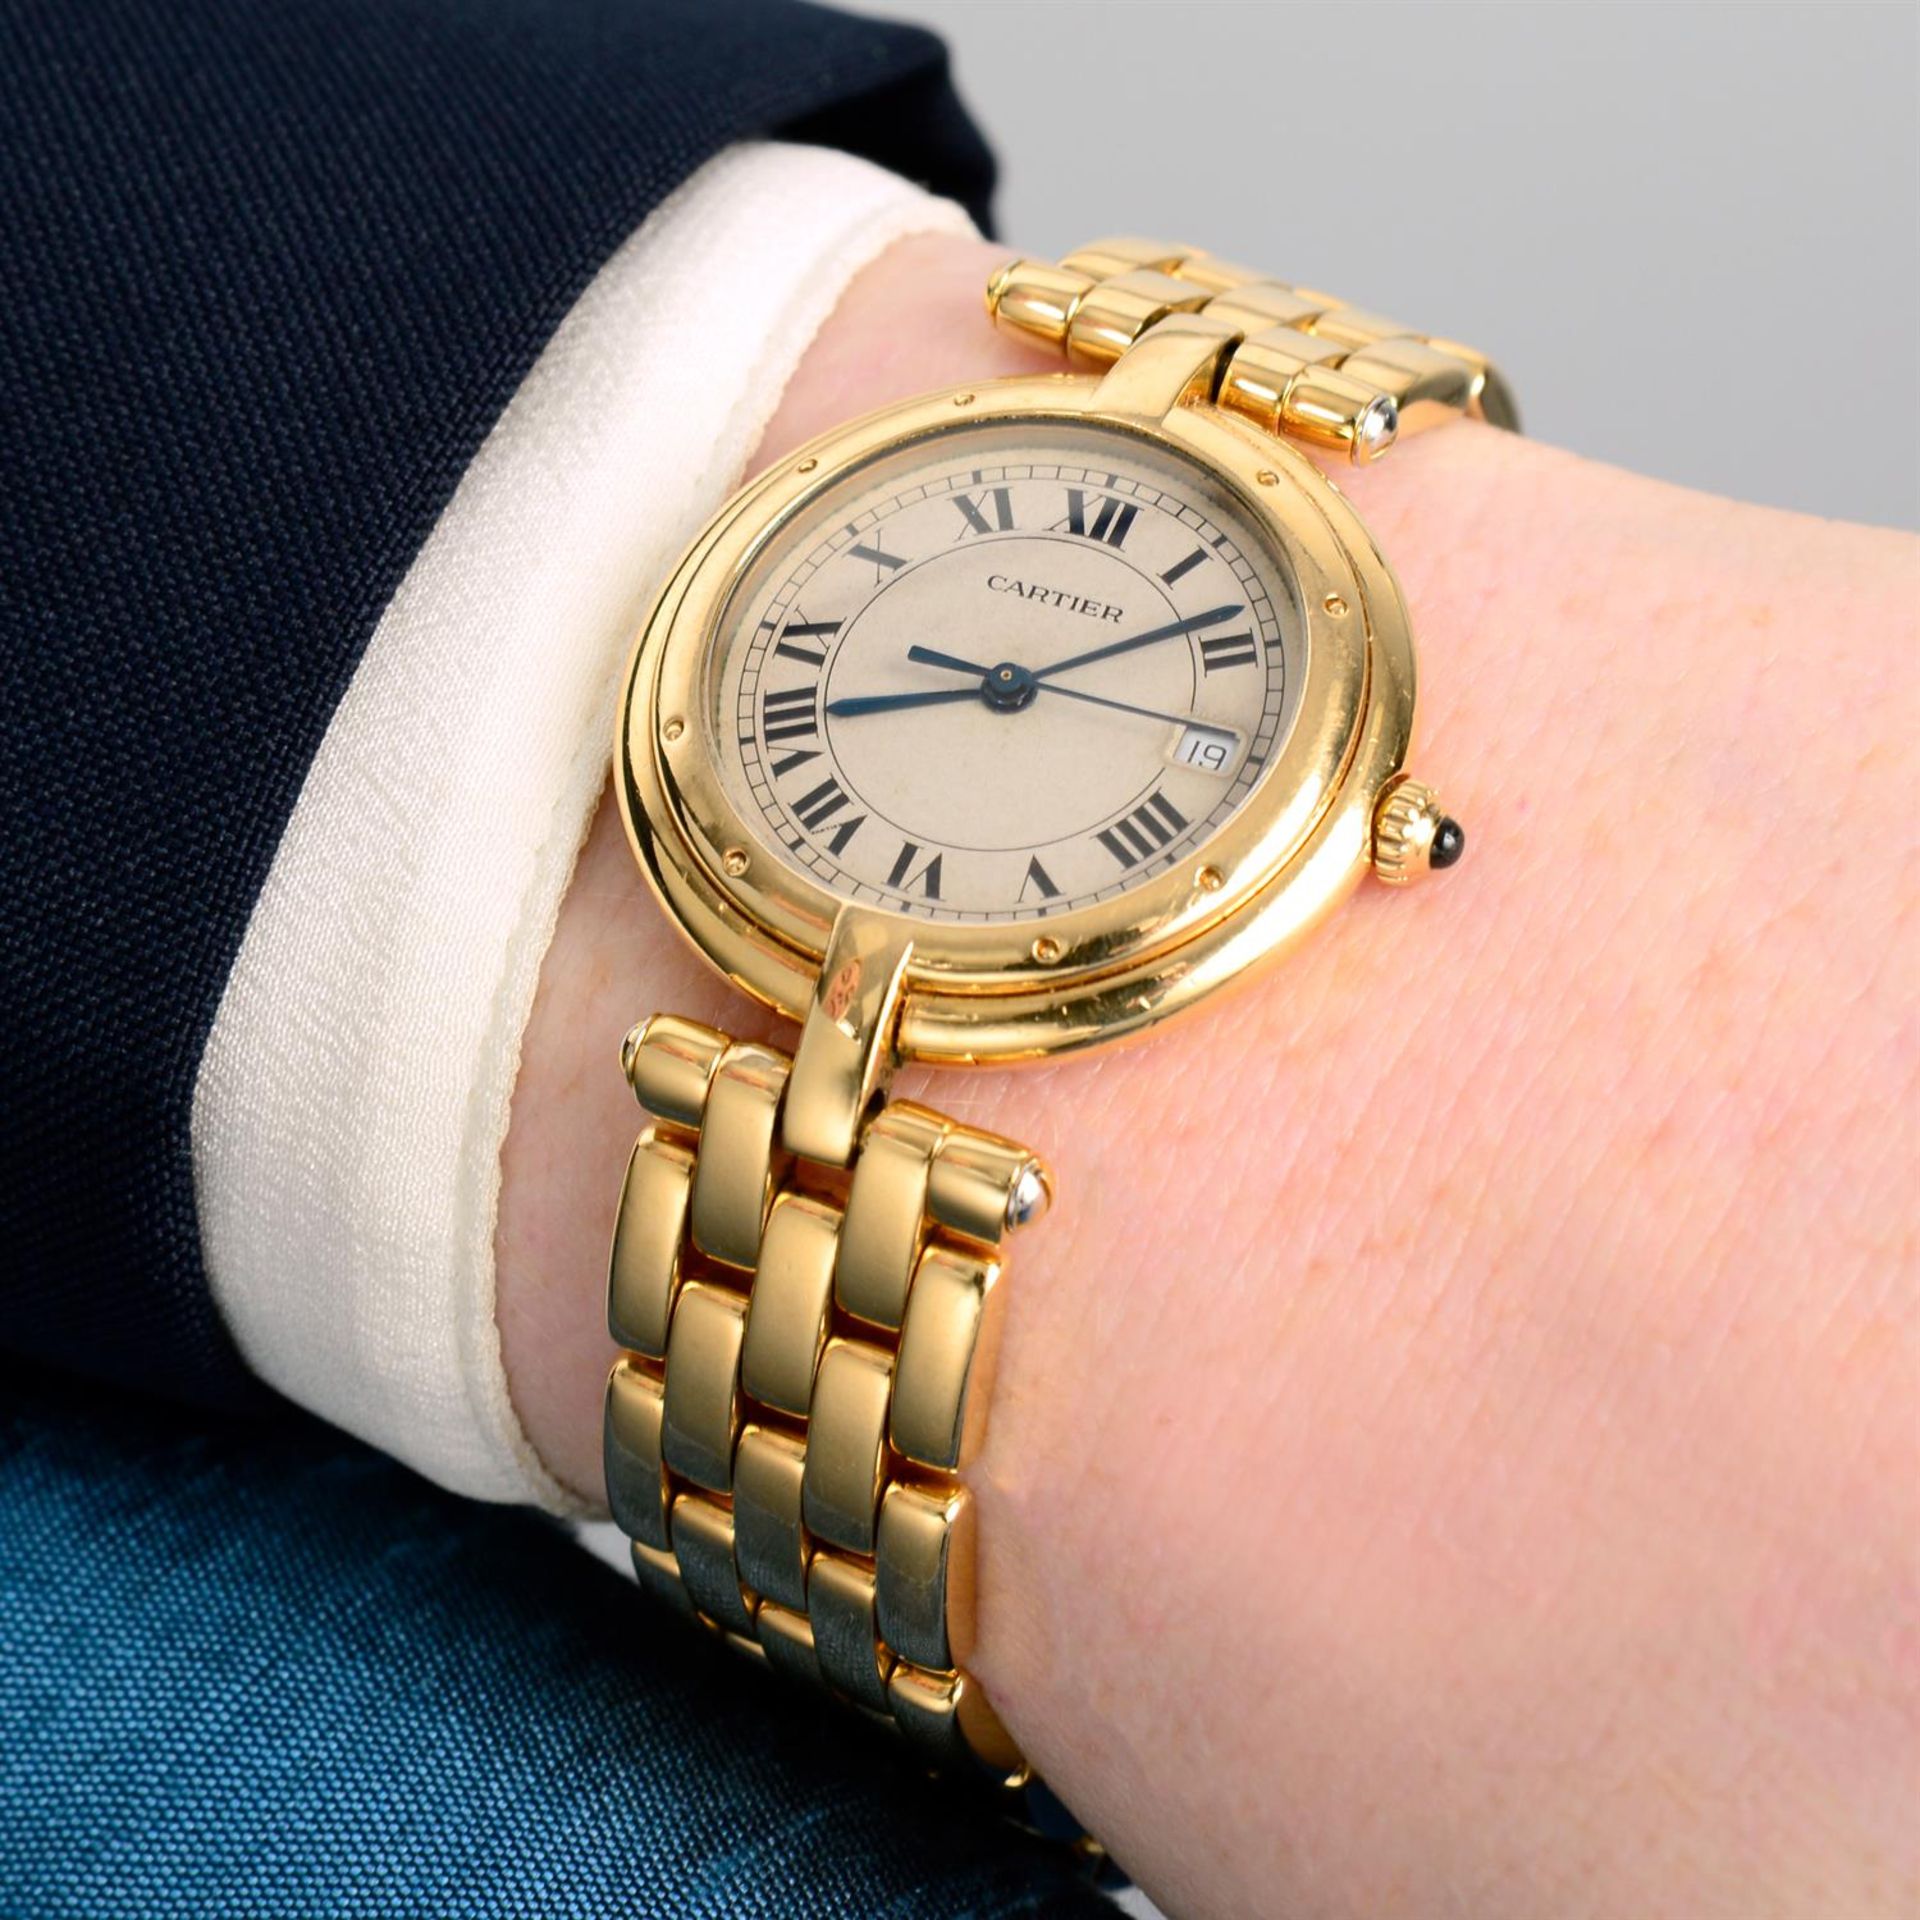 CARTIER - a 18ct gold Panthere Vendome bracelet watch, 24mm. - Image 6 of 6